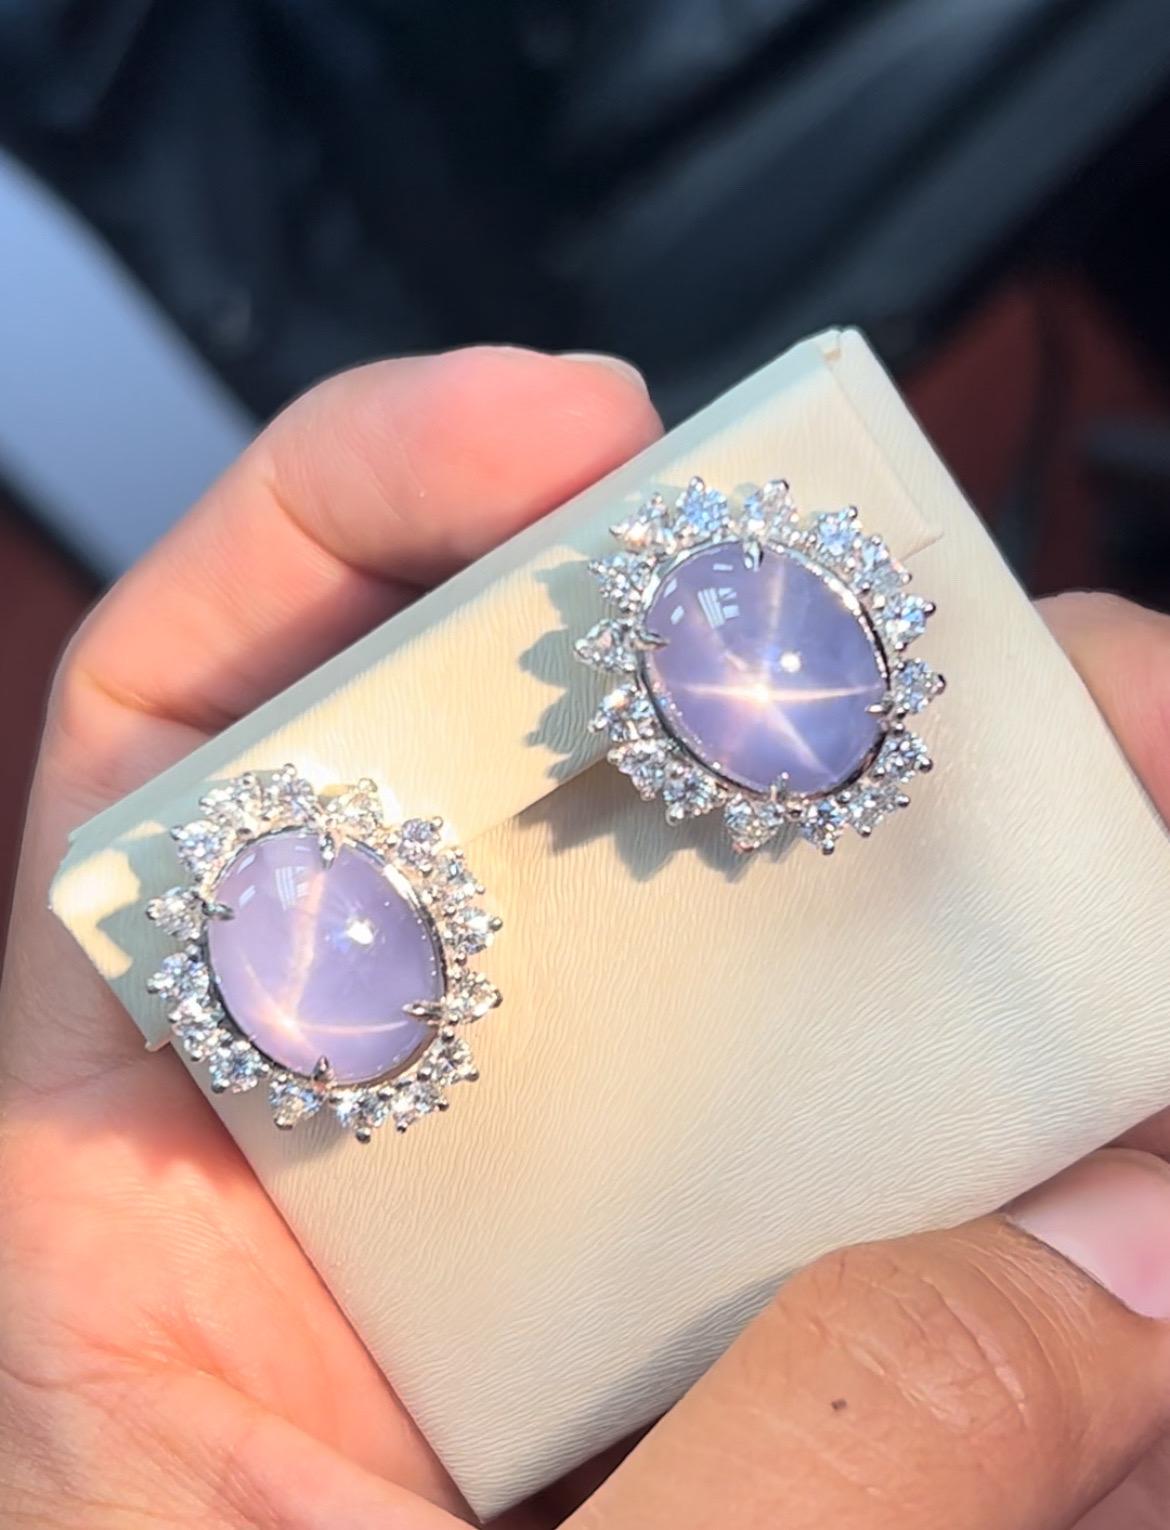 Cabochon 28.50ct Star Sapphire earrings in platinum. GIA certified. For Sale